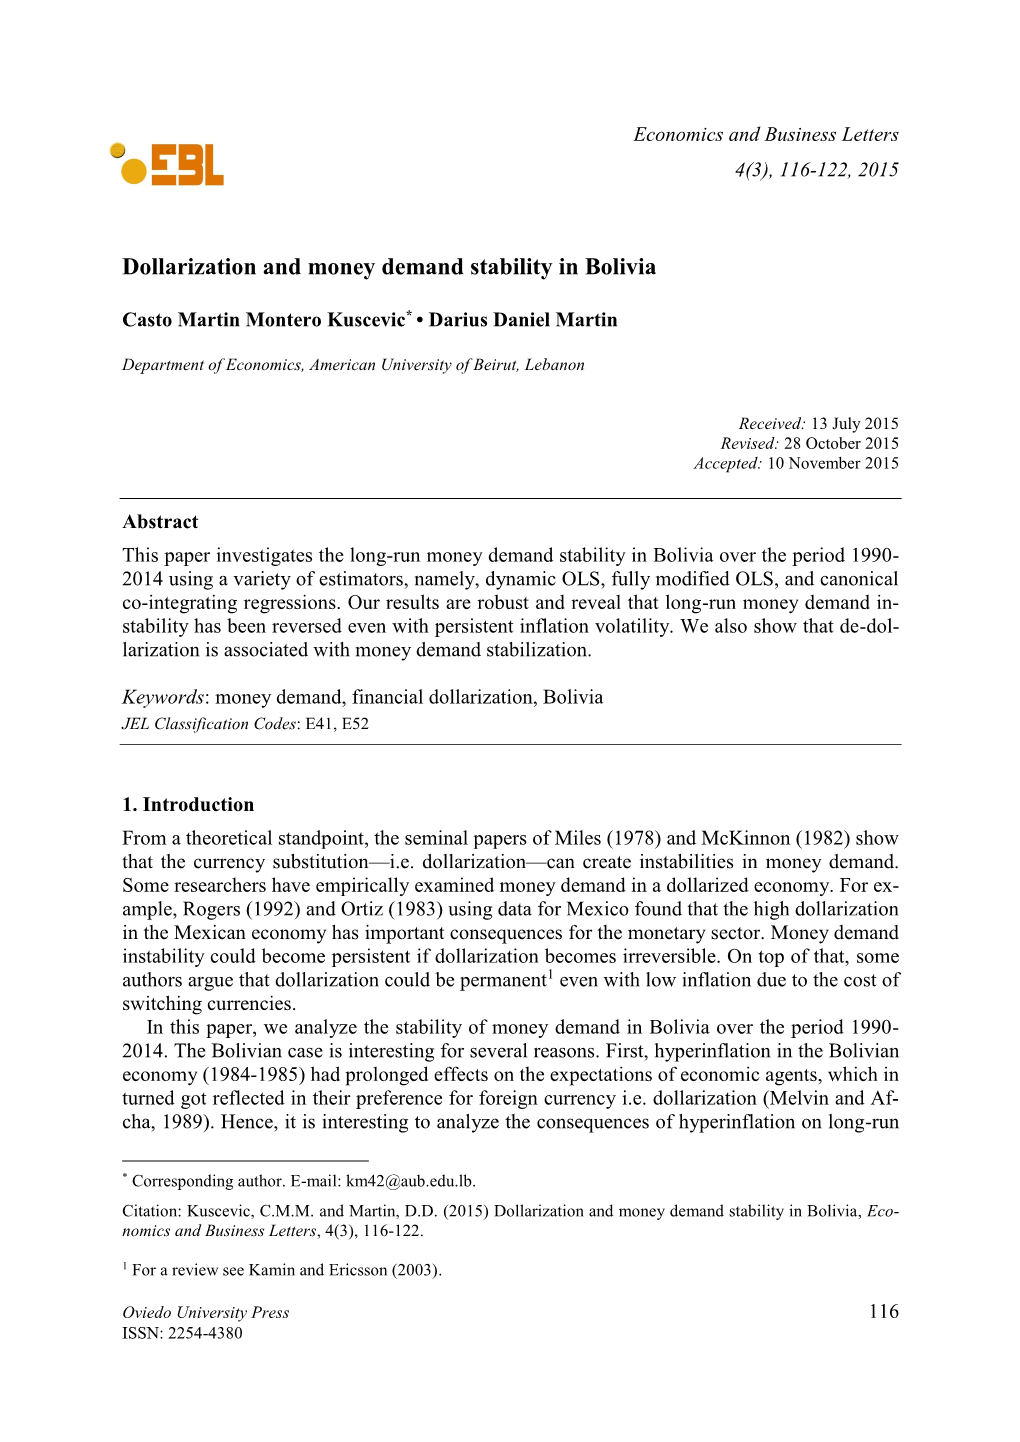 Dollarization and Money Demand Stability in Bolivia